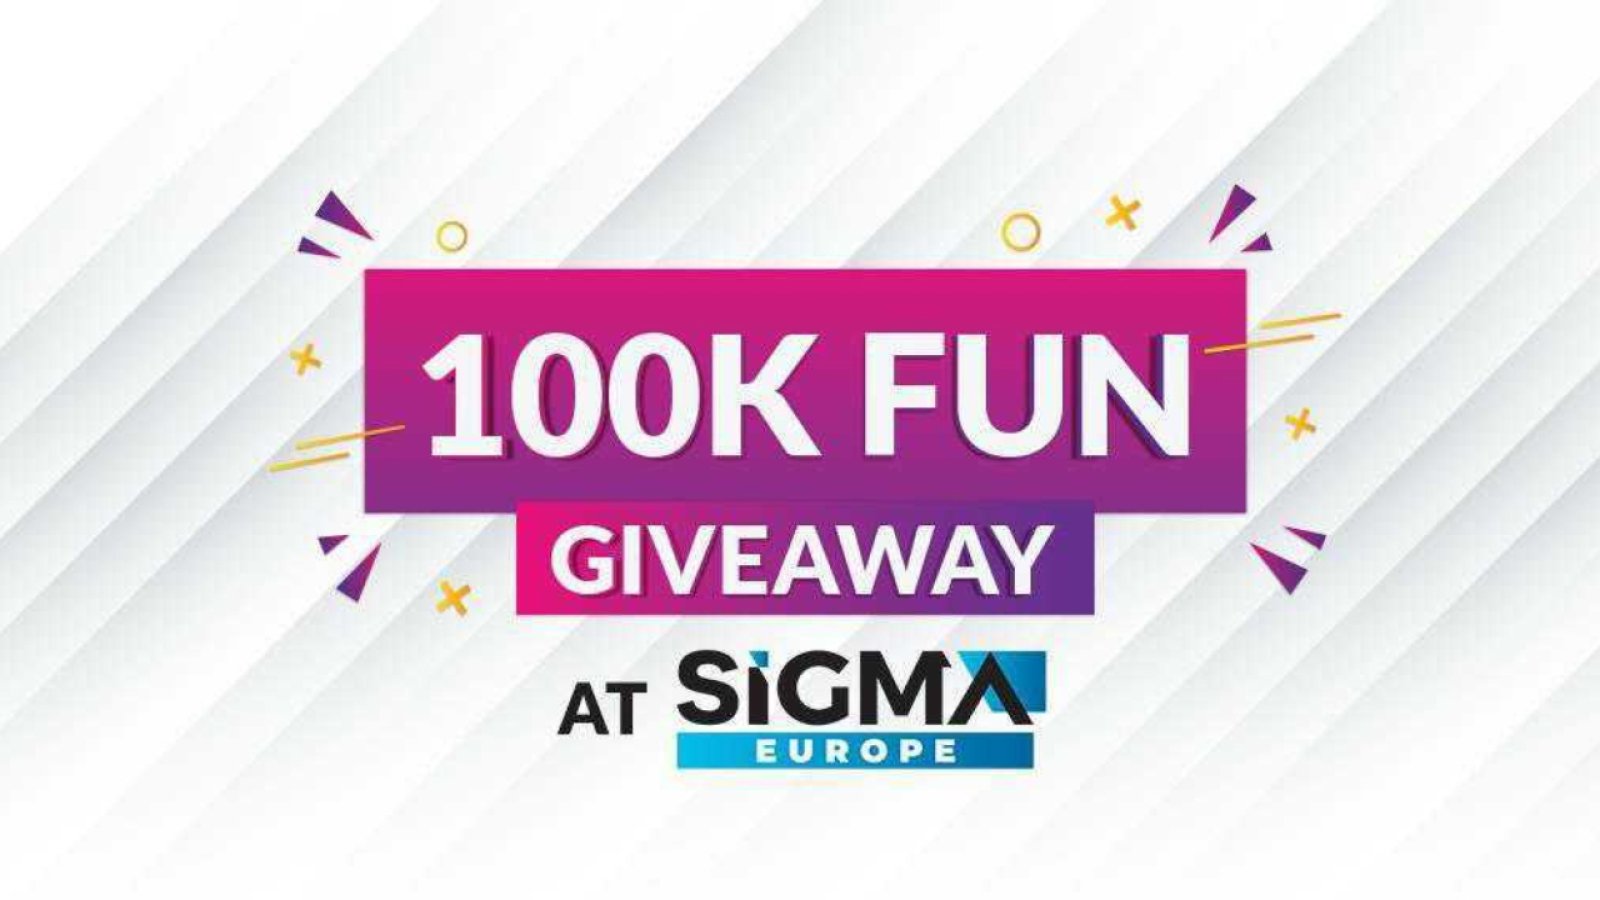 Lucky SiGMA Attendee Wins 100,000 FUNTokens in Twitter Giveaway